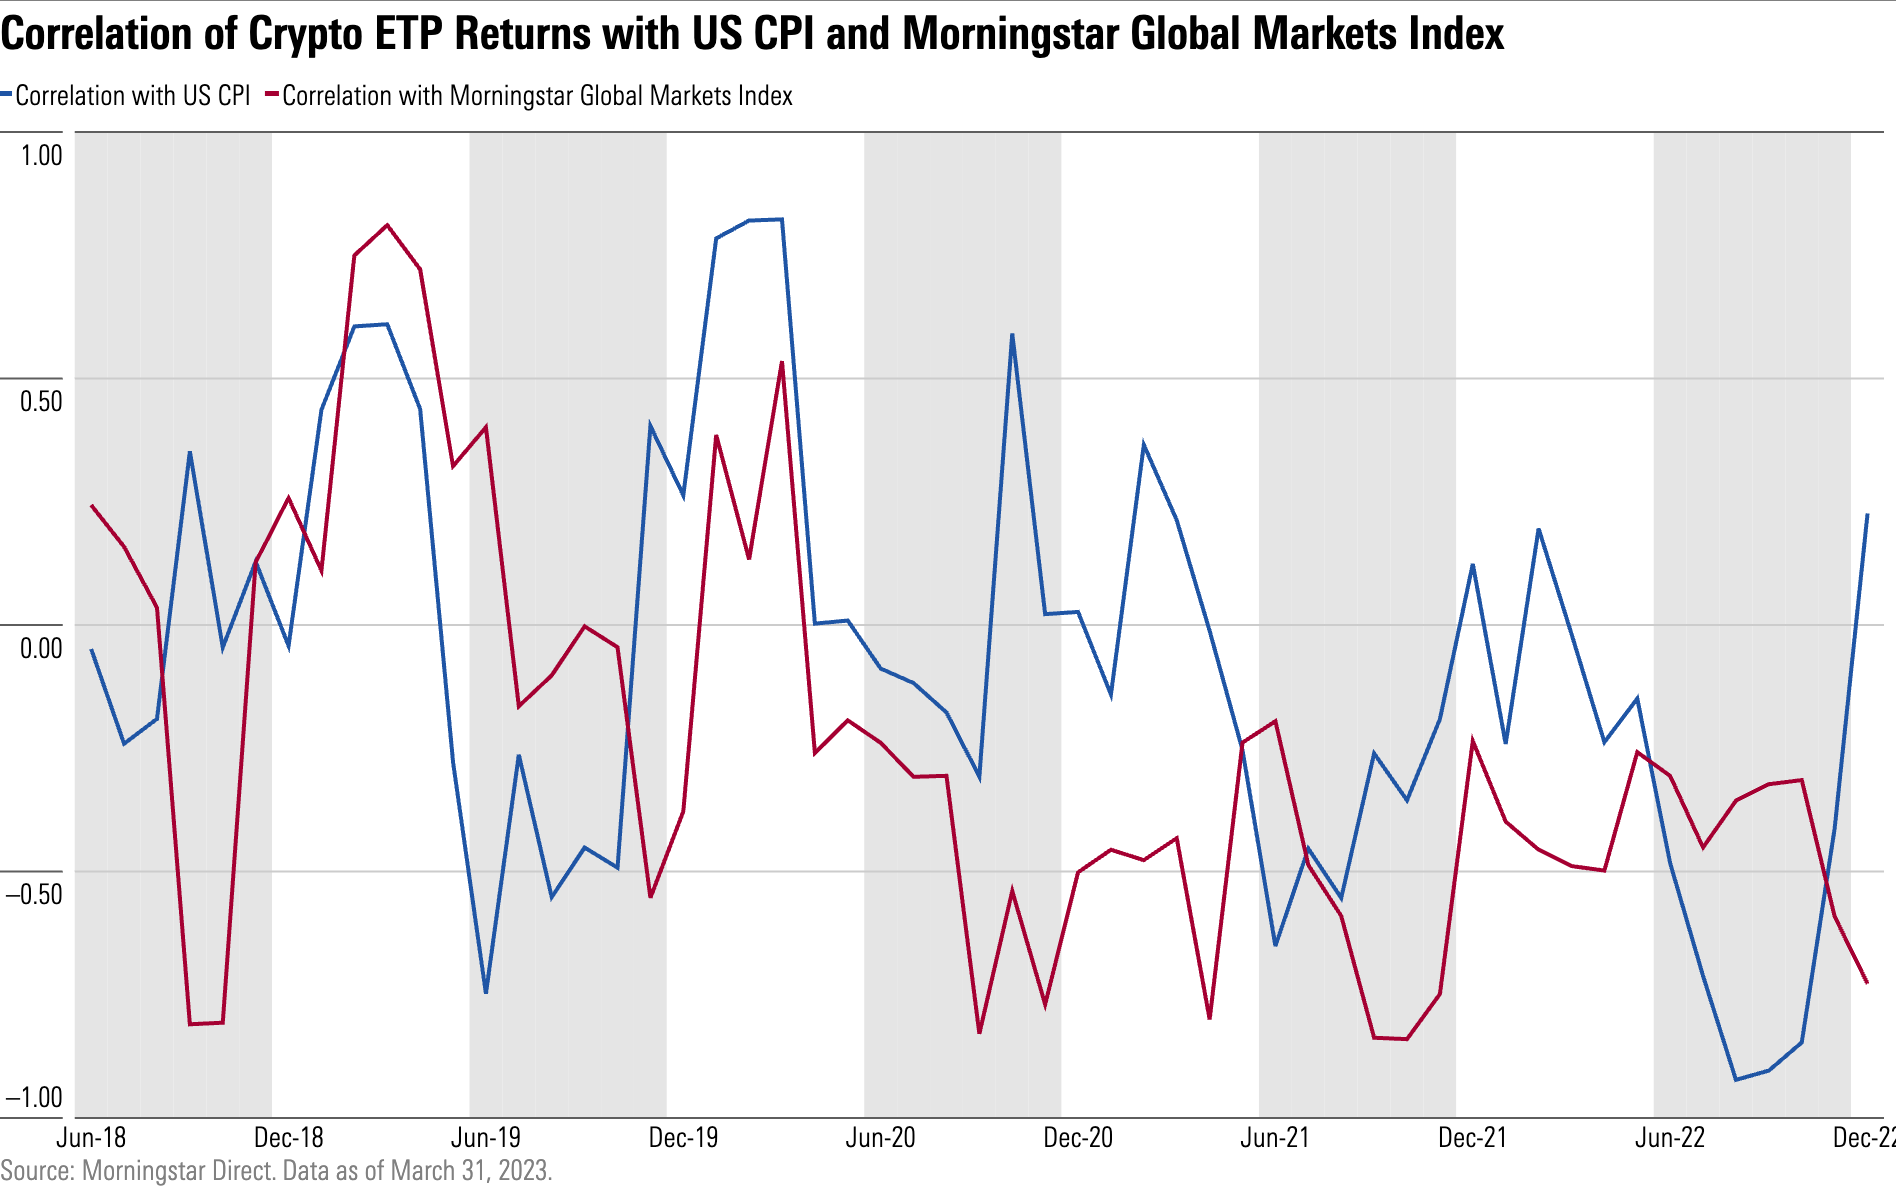 Line chart showing that correlation of ETP returns with both US CPI and Morningstar Global Markets Index experiences massive swings on both sides.